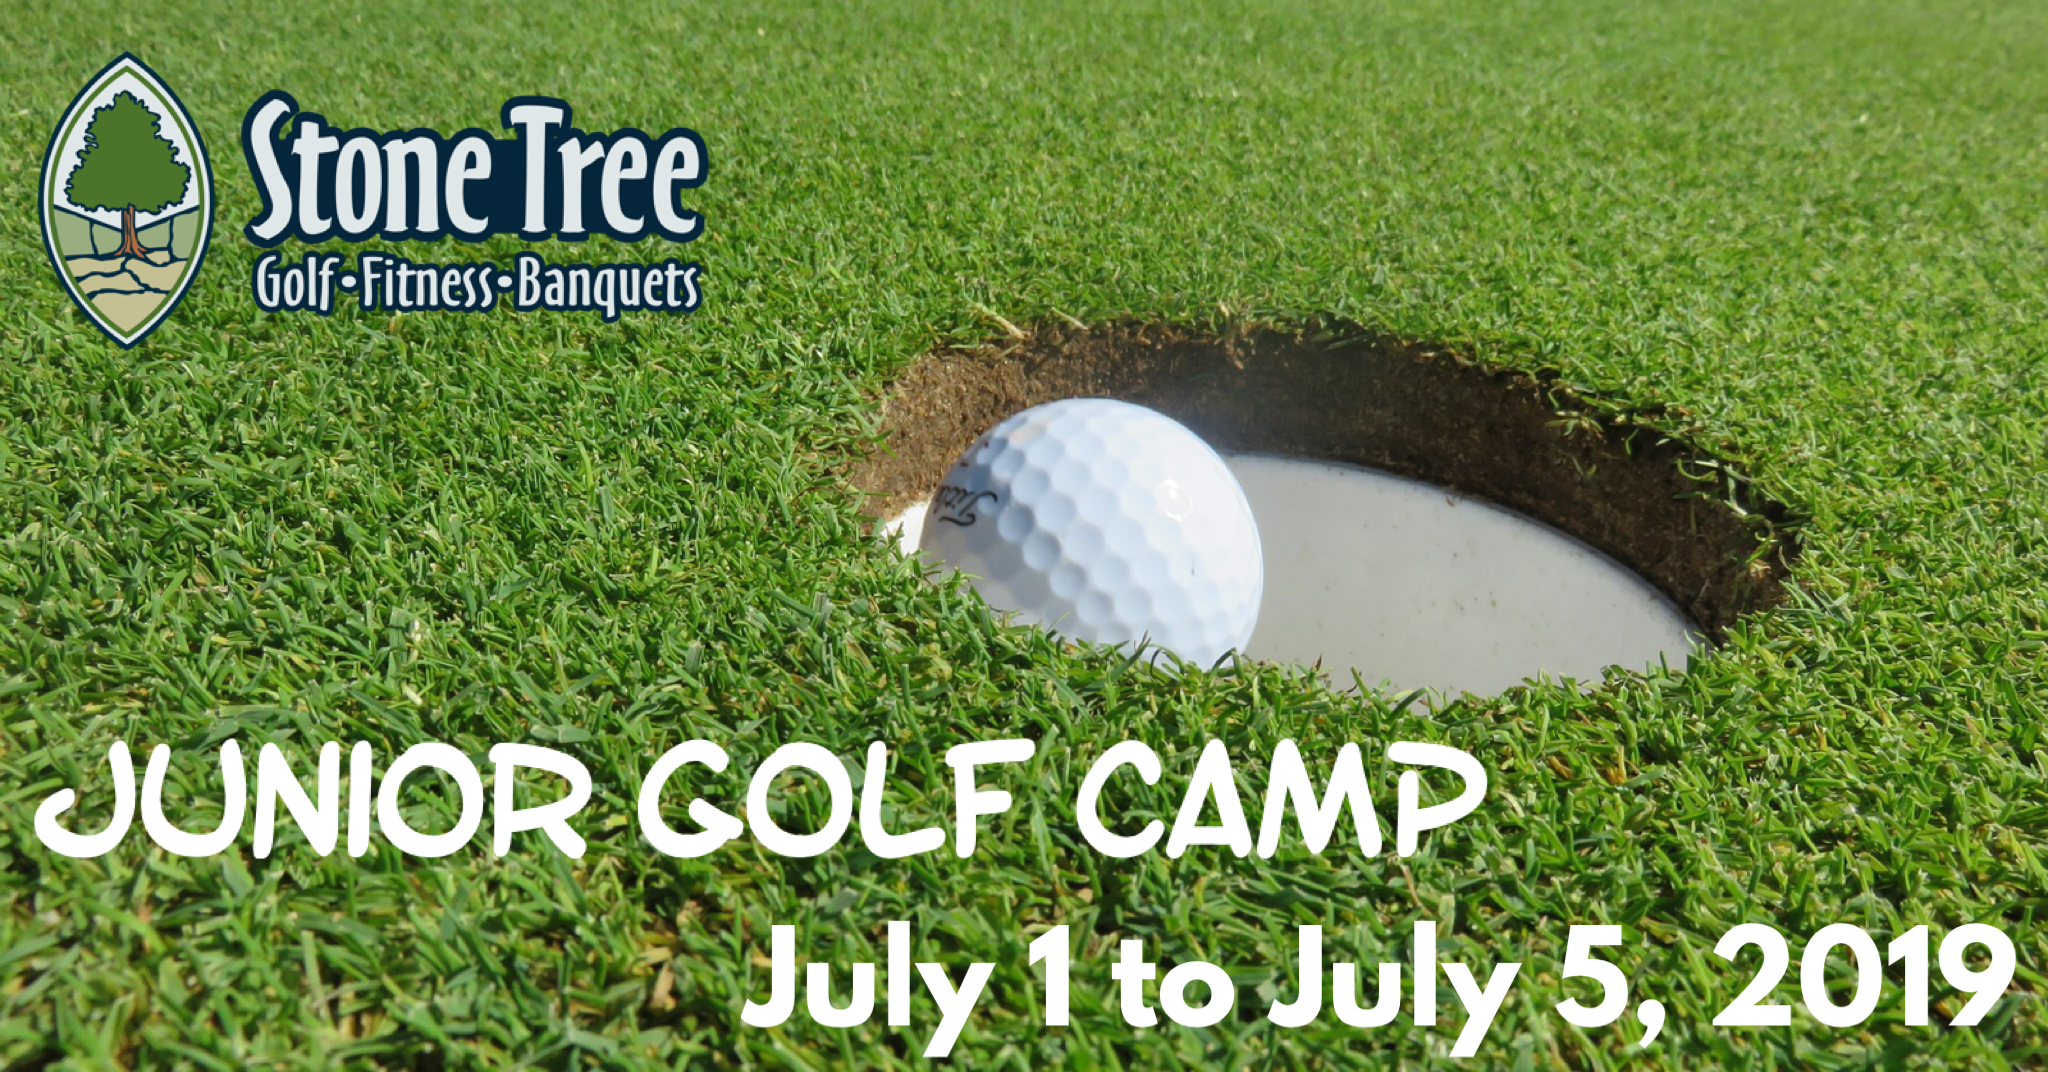 Junior Golf Camp - July 15 to July 19, 2019